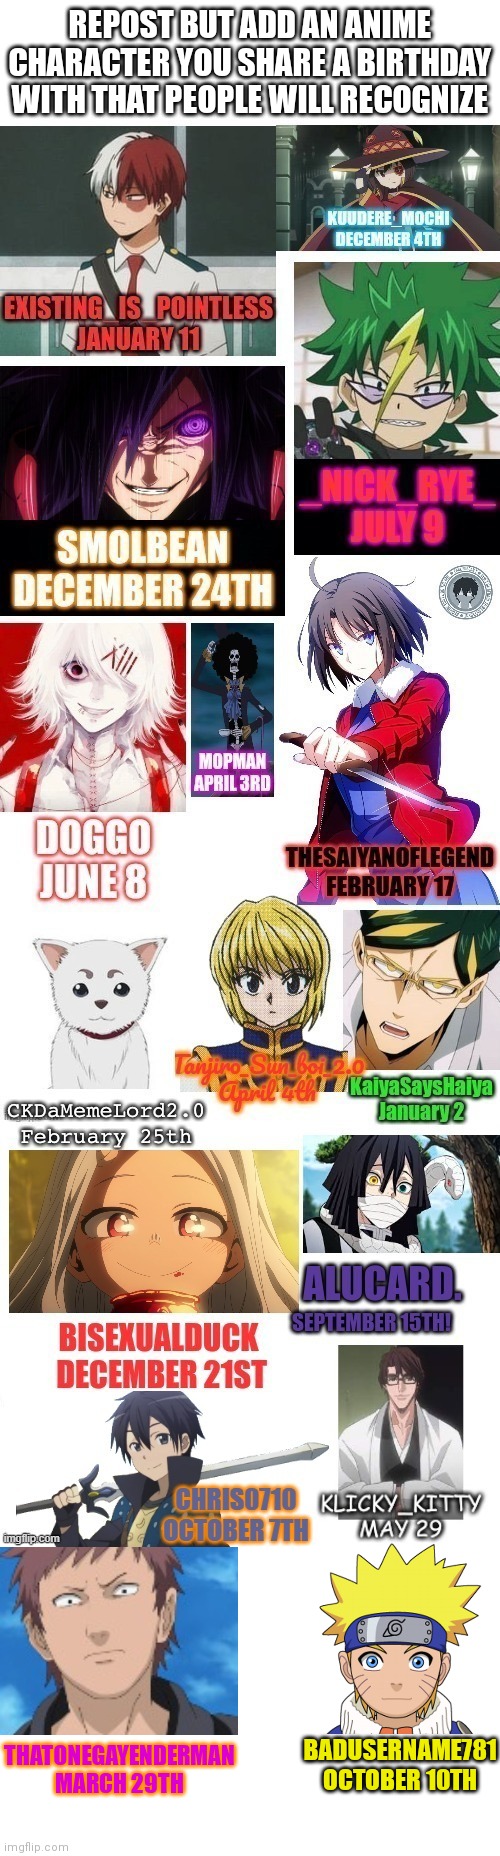 Don't mind me, just fixing it for the second time | REPOST BUT ADD AN ANIME CHARACTER YOU SHARE A BIRTHDAY WITH THAT PEOPLE WILL RECOGNIZE; THATONEGAYENDERMAN
MARCH 29TH; BADUSERNAME781
OCTOBER 10TH | image tagged in repost | made w/ Imgflip meme maker